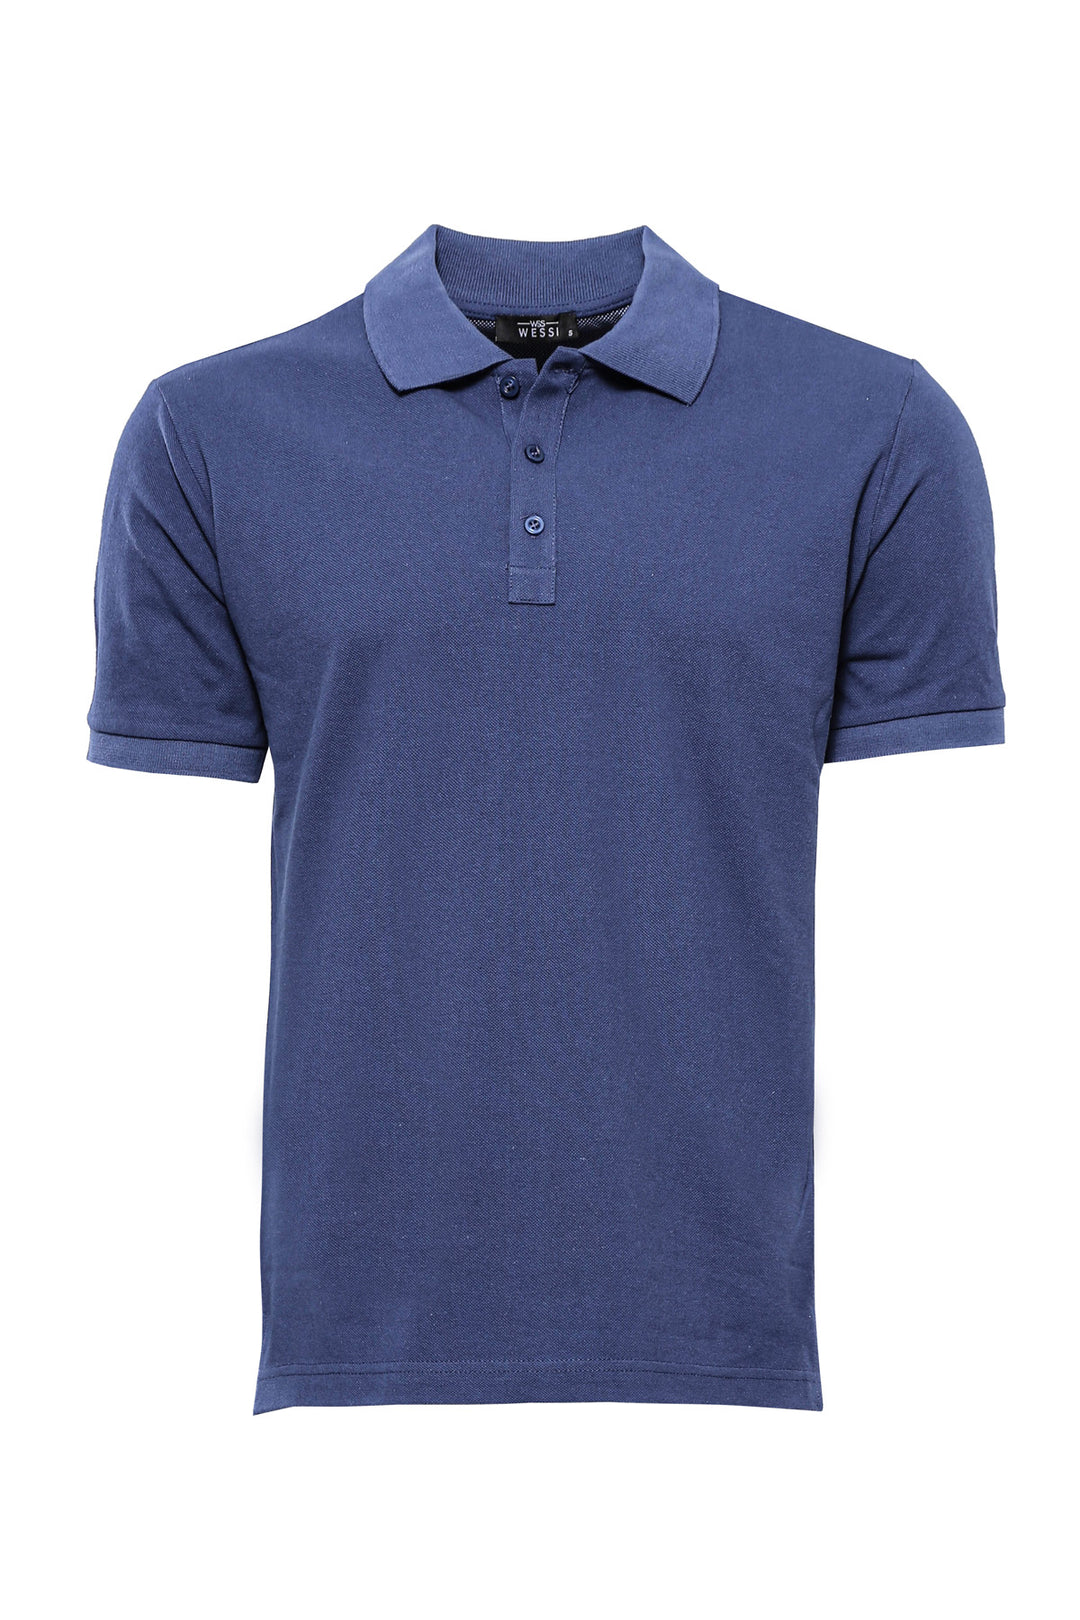 Oxford Navy Polo Collar T-shirt - Wessi